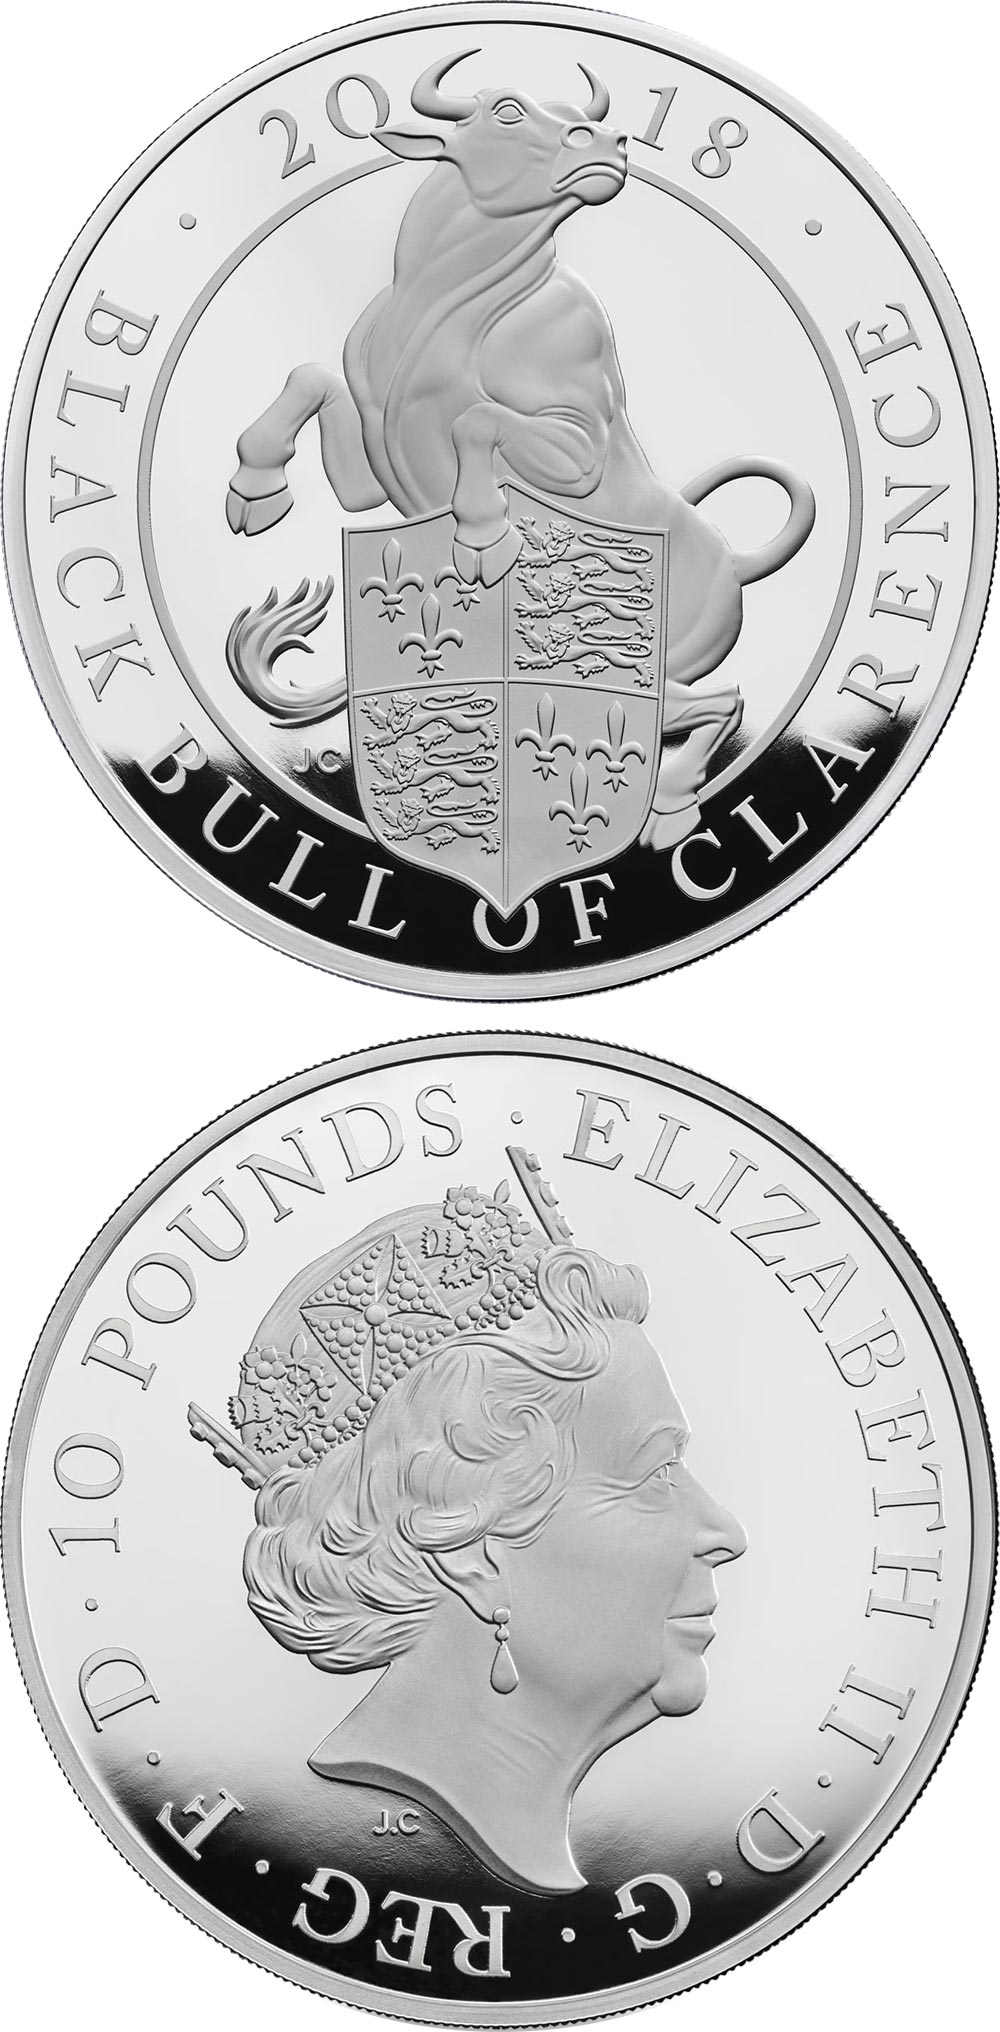 Image of 10 pounds coin - The Black Bull of Clarence | United Kingdom 2018.  The Silver coin is of Proof quality.